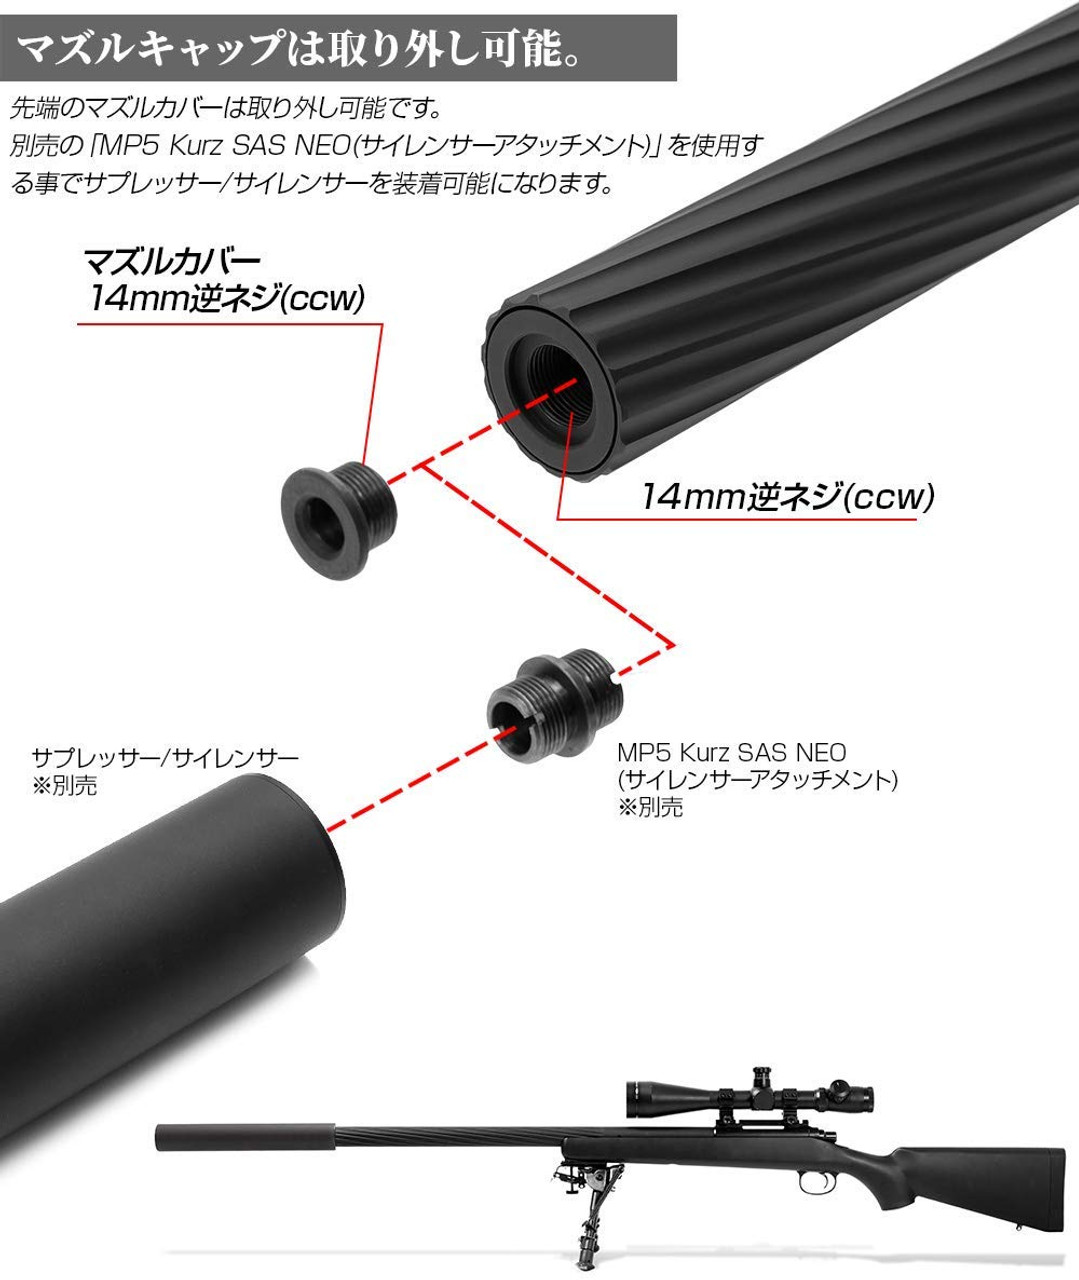 LayLax PSS VSR-10 series Fluted outer barrel twist type